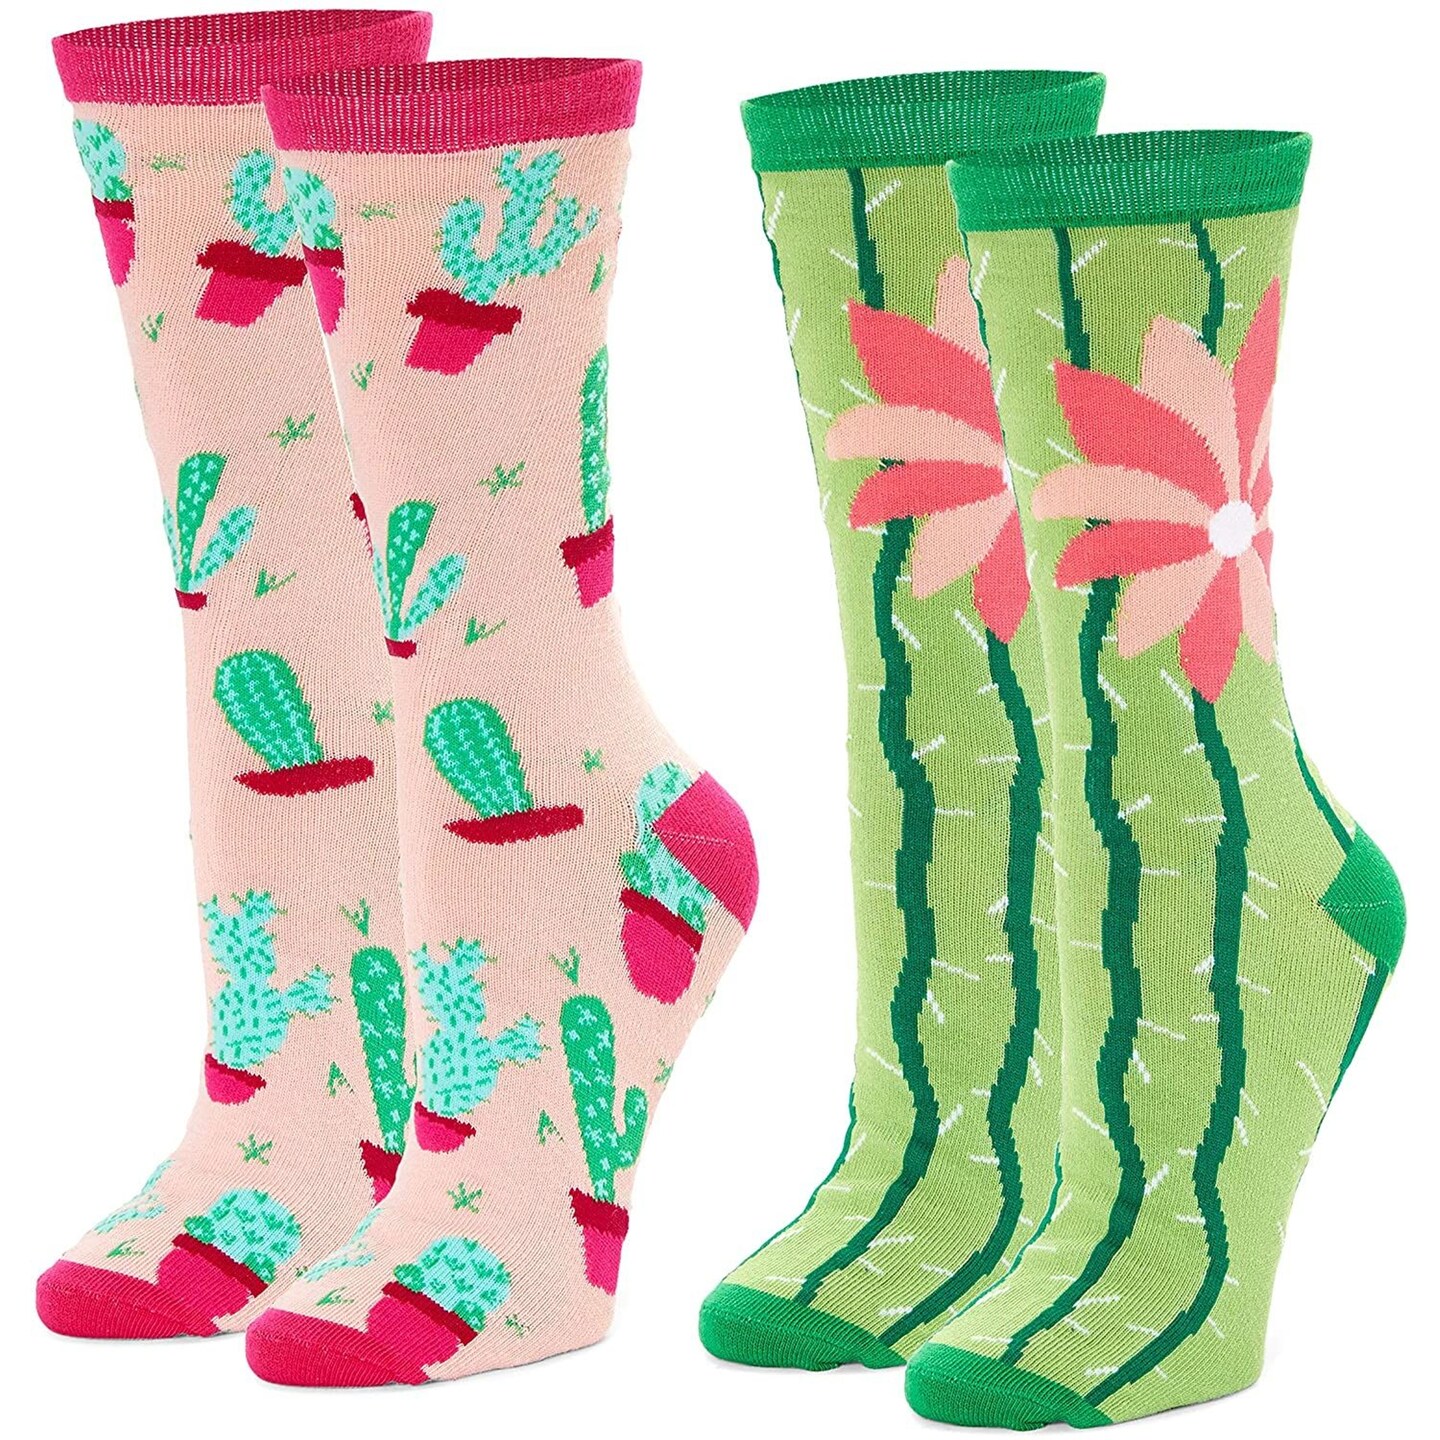 2-Pair Cactus Cute Crew Socks for Women Dress up Boots Sneakers (One Size)